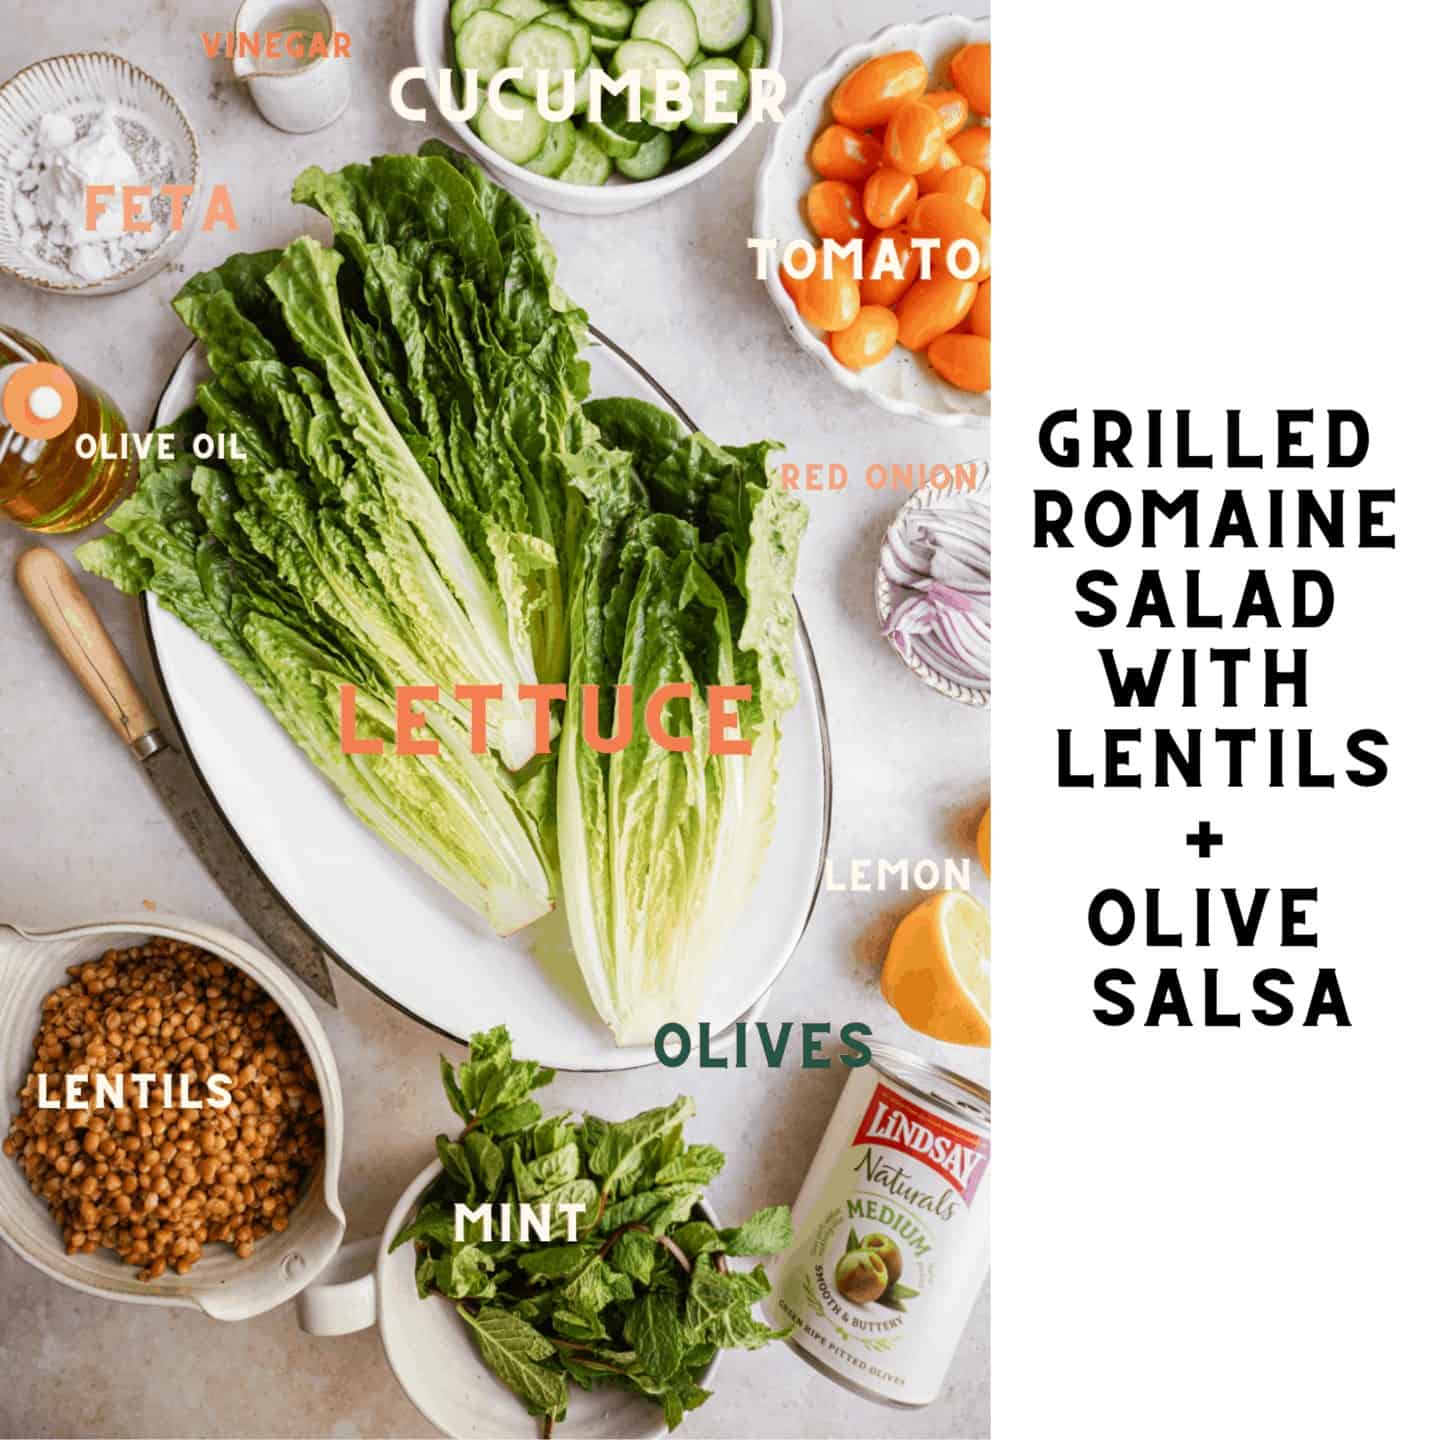 Key ingredients for Grilled Romaine Salad on a table